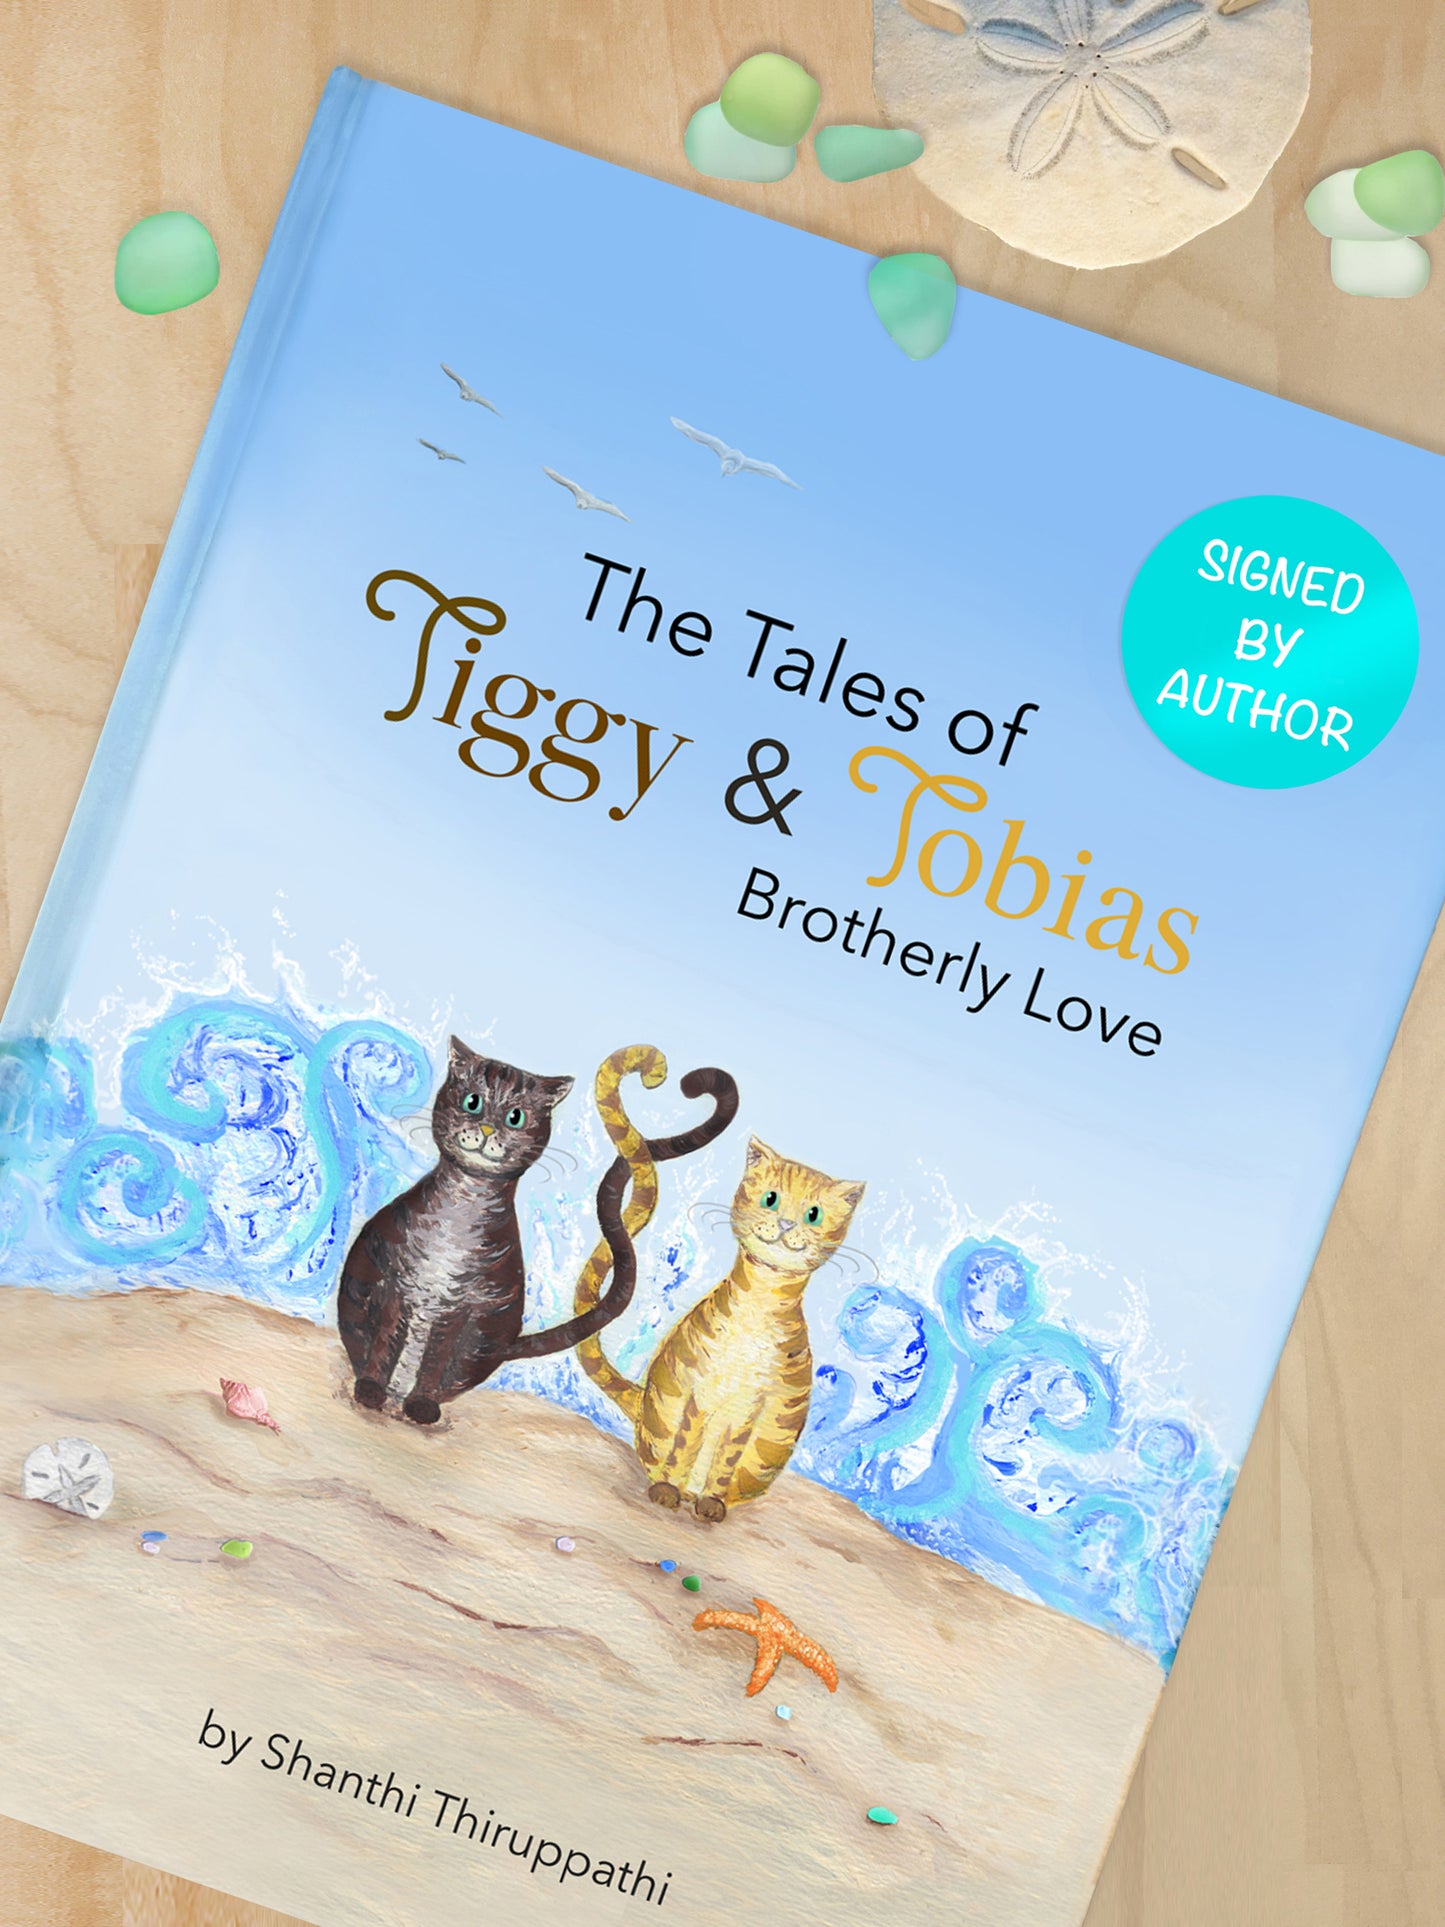 Kids Books / HARDCOVER / SIGNED BY AUTHOR / The Tales of Tiggy & Tobias: Brotherly Love